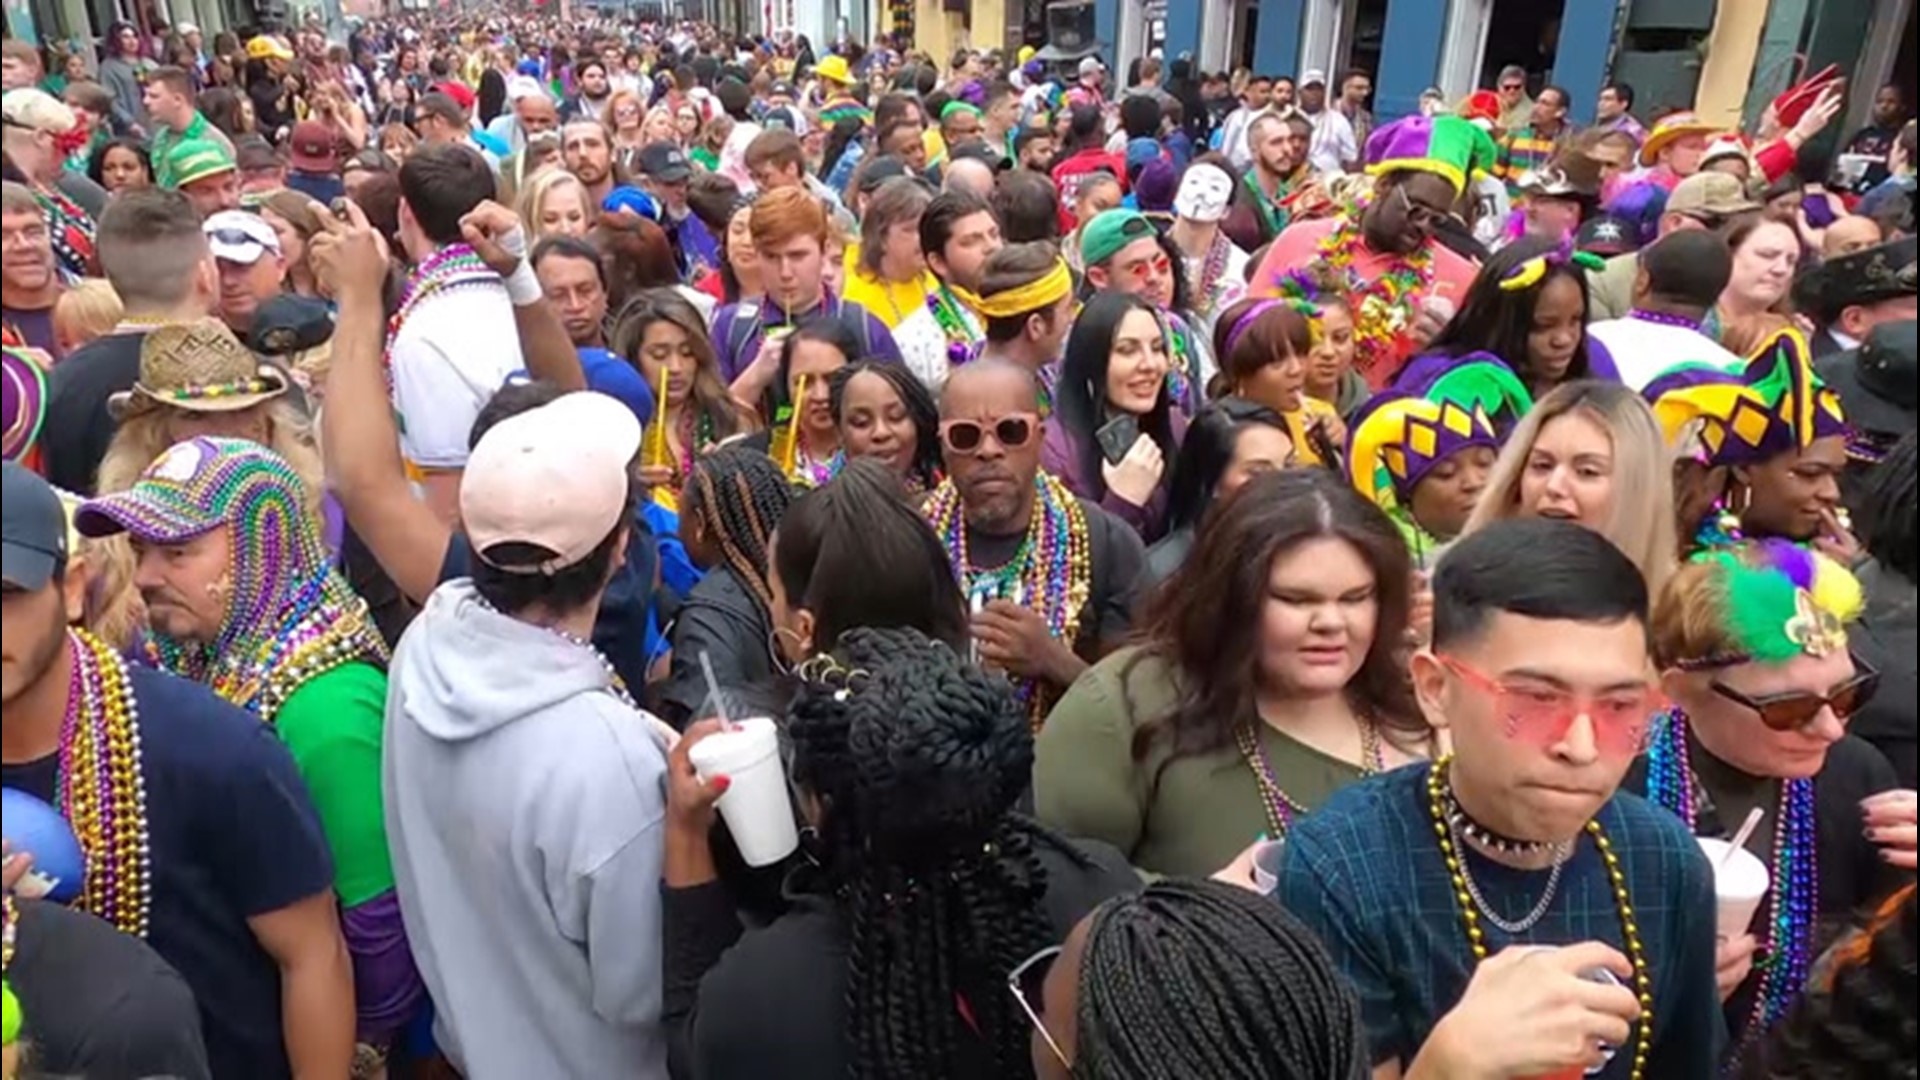 Economic studies show over a billion-dollar impact each year from Mardi Gras. But since much of it happens outdoors, weather can help or hurt that number.